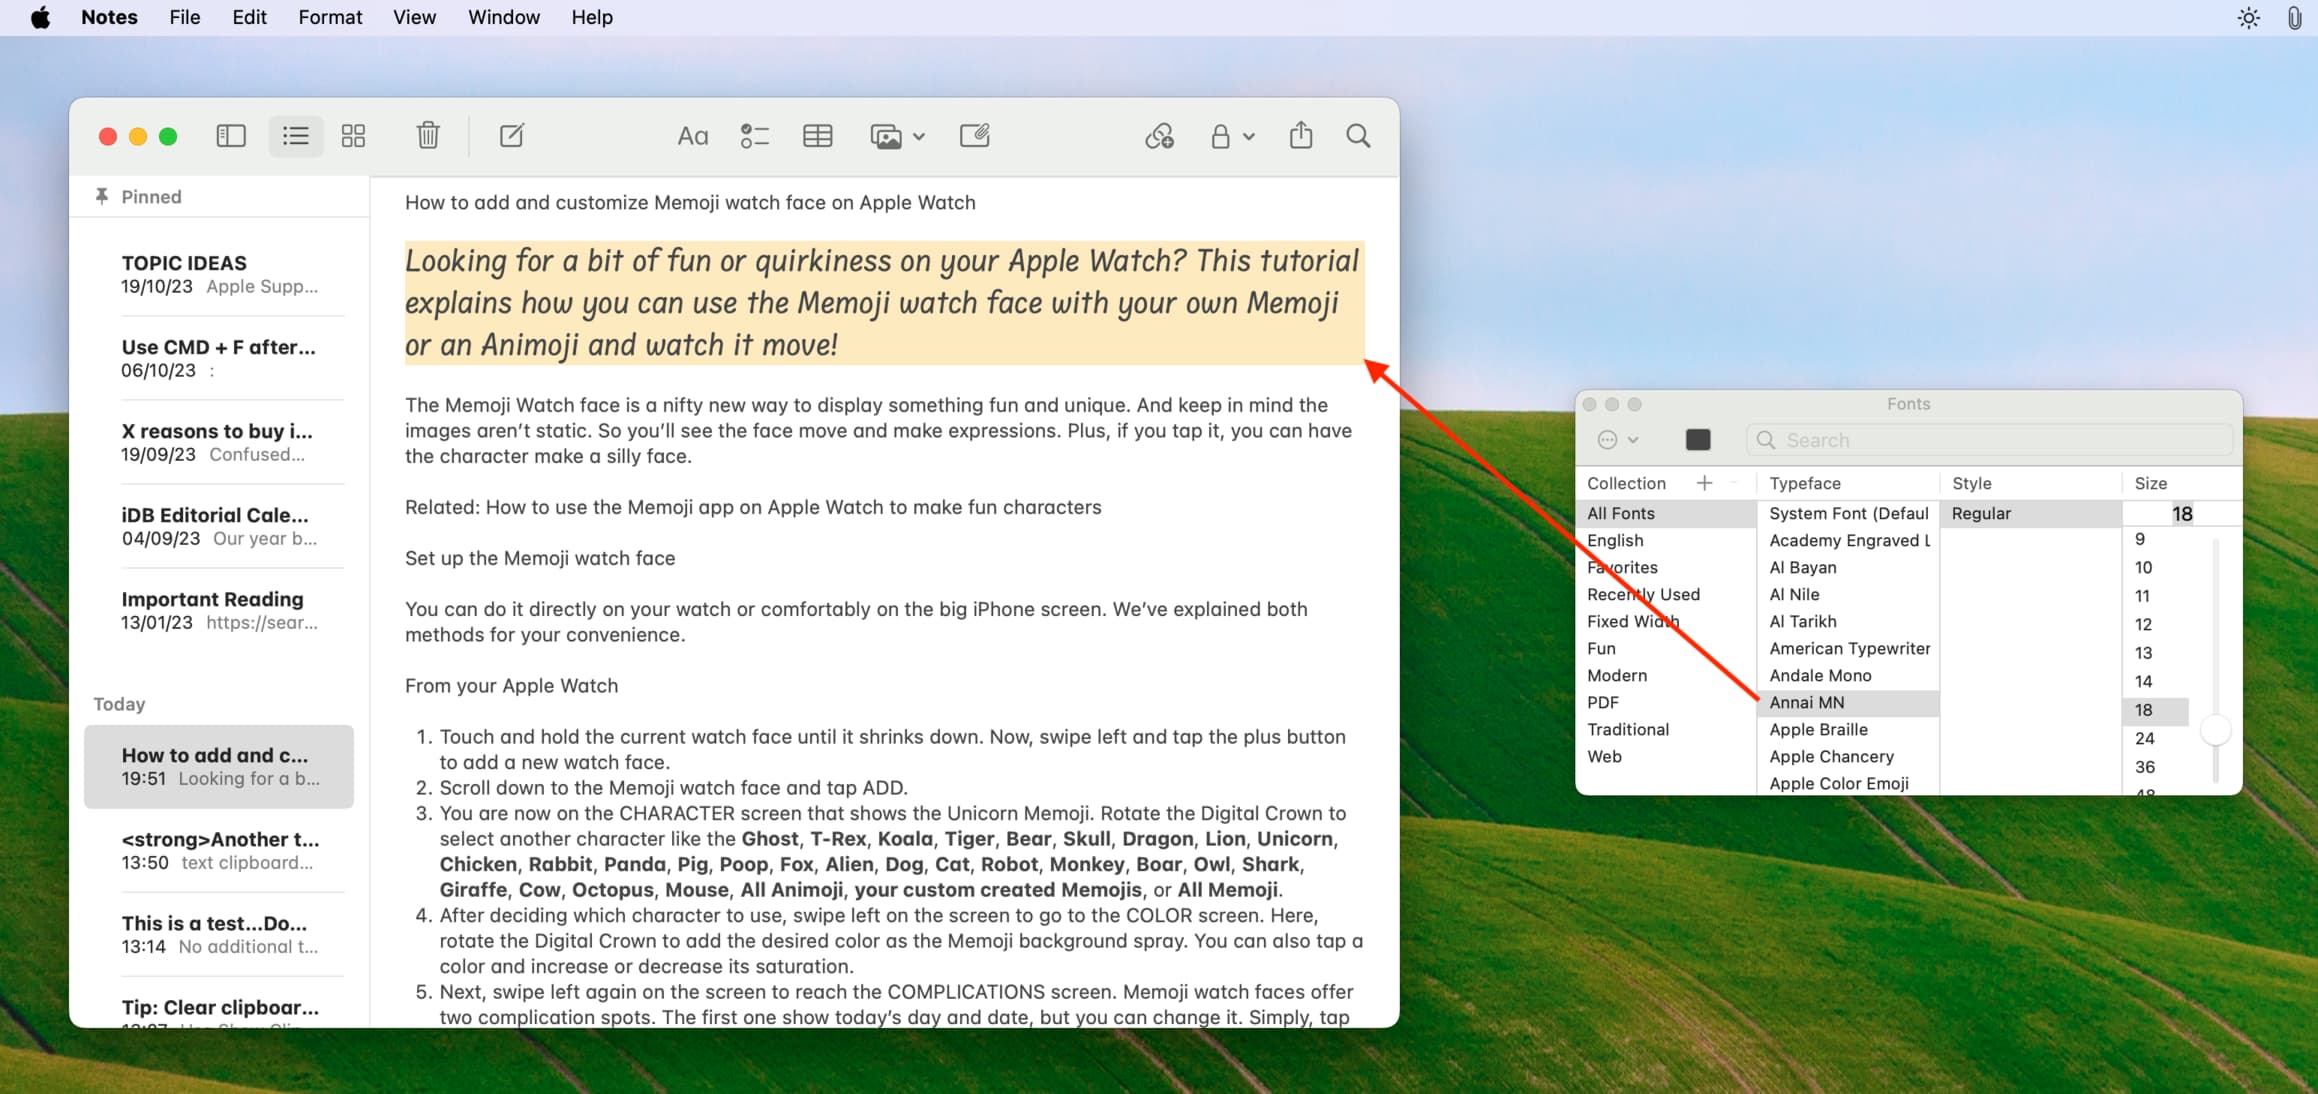 Using different fonts in Notes app on Mac